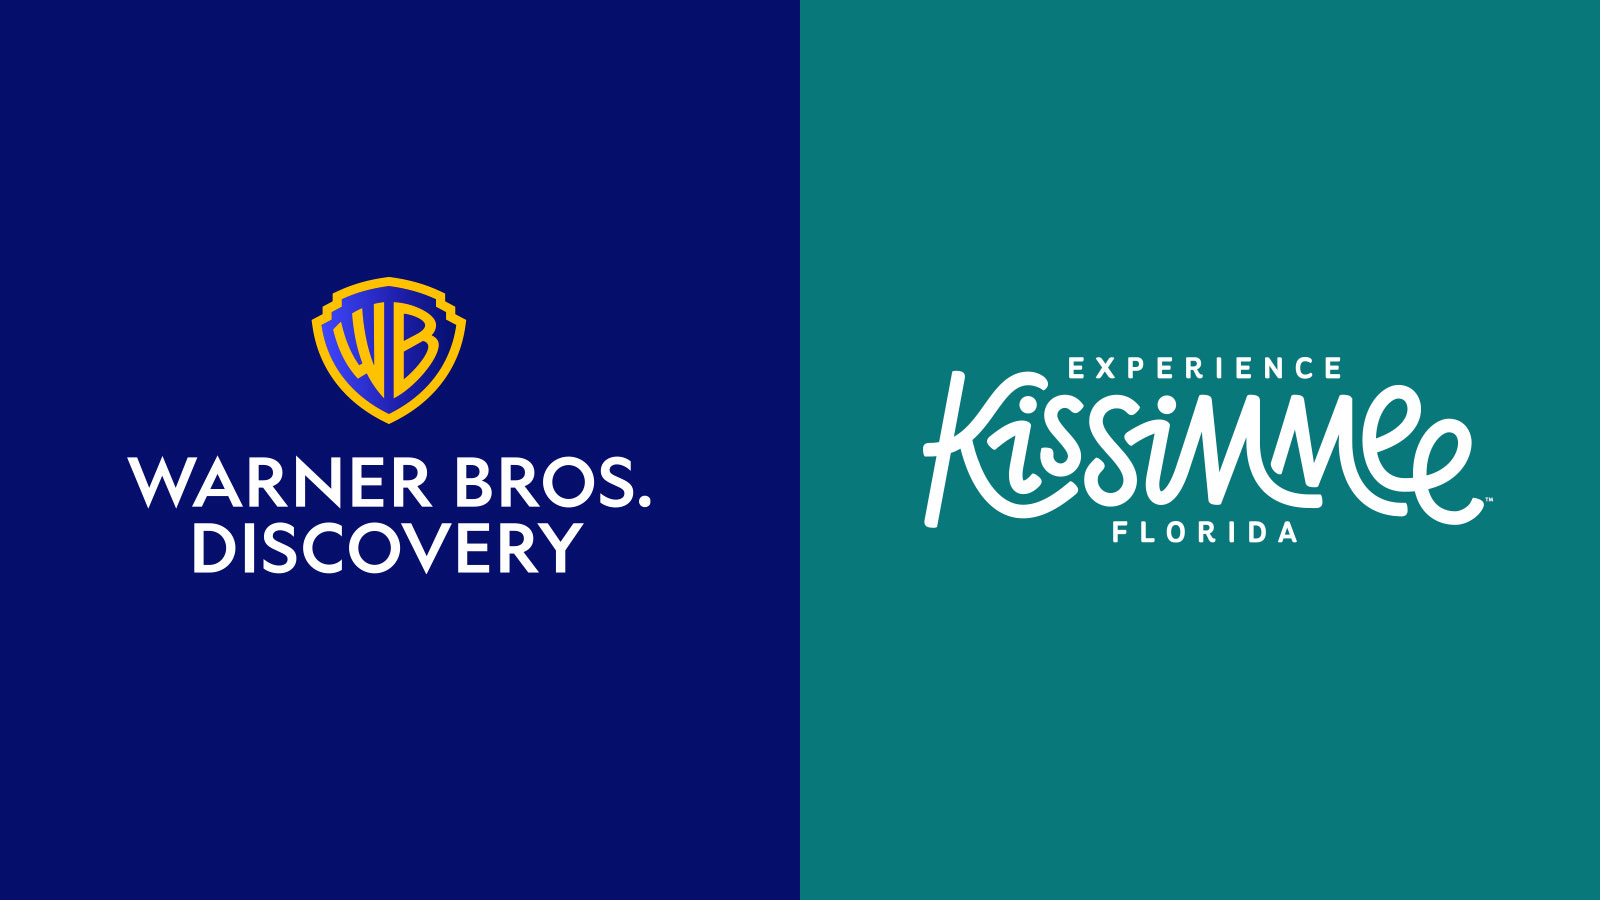 Warner Bros Discovery Combines Us And International Creative Capabilities And Audience Reach 